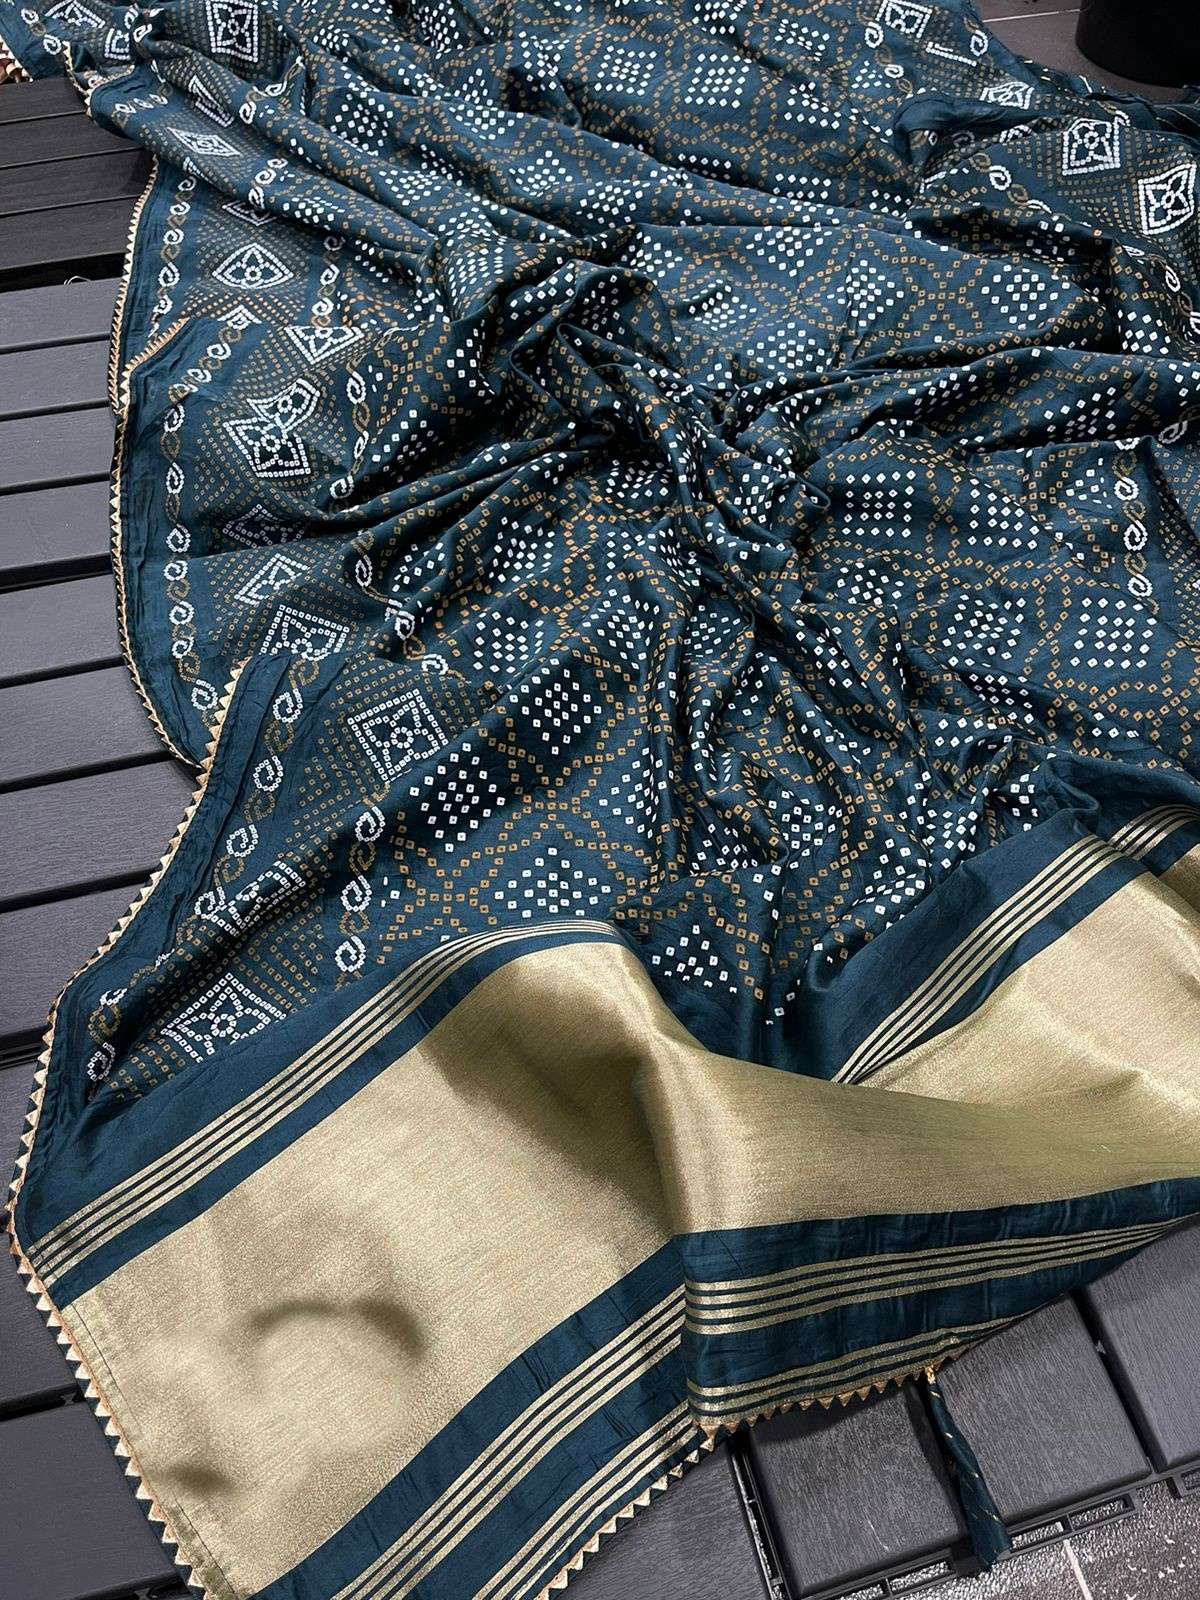 Festival Special Mal Cotton With Bandhani Printed Best quali...